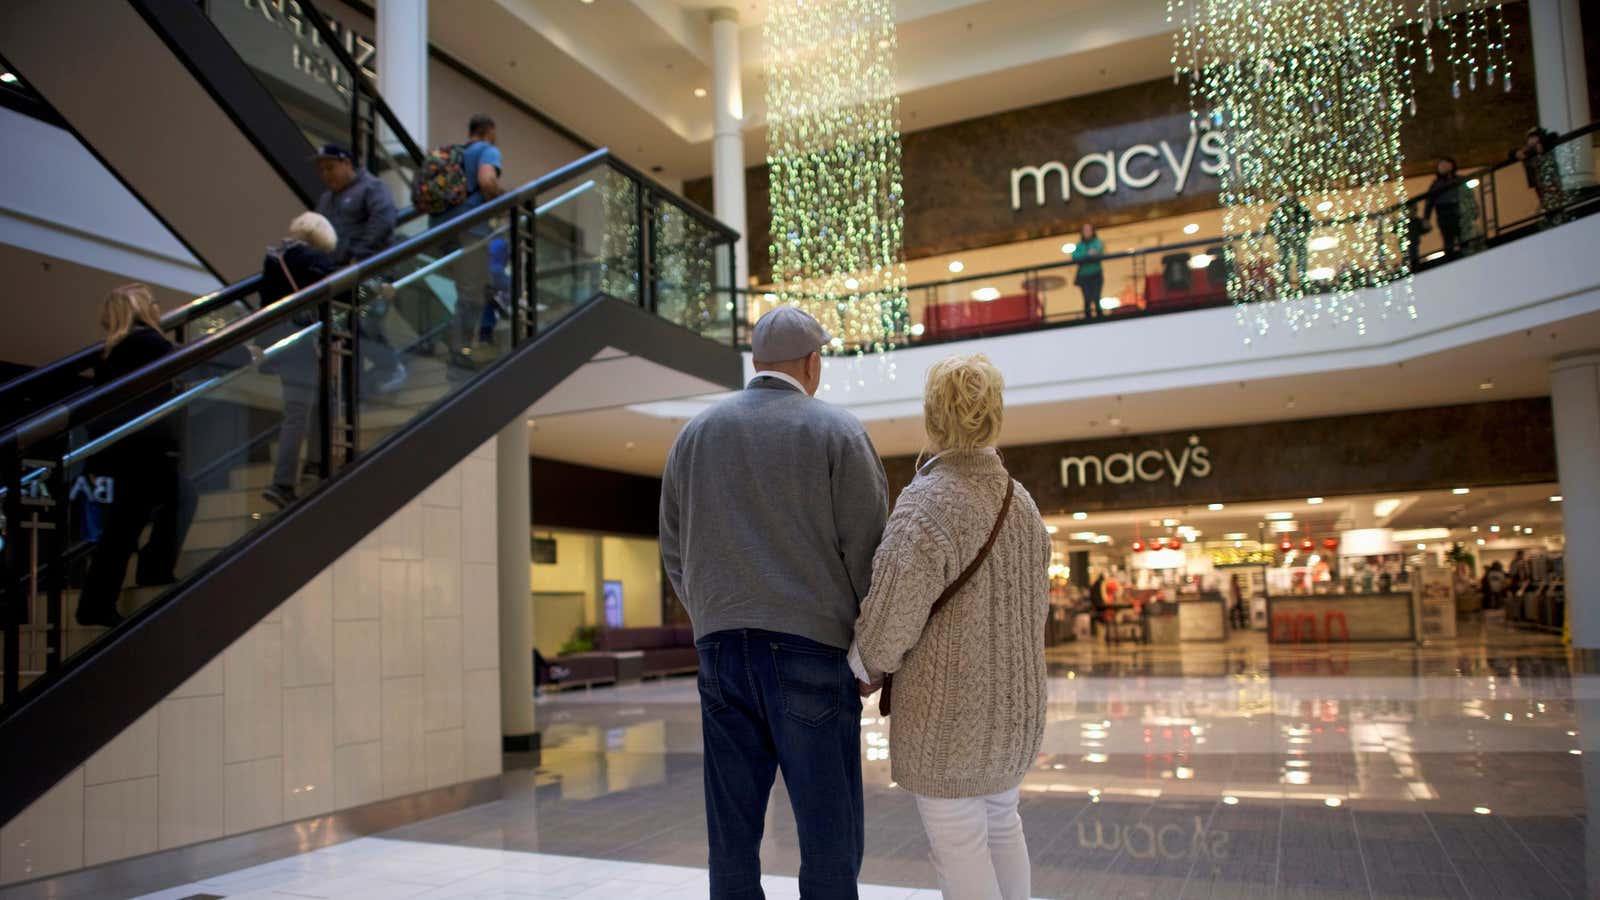 Macy’s is planning new smaller-format stores outside of malls.